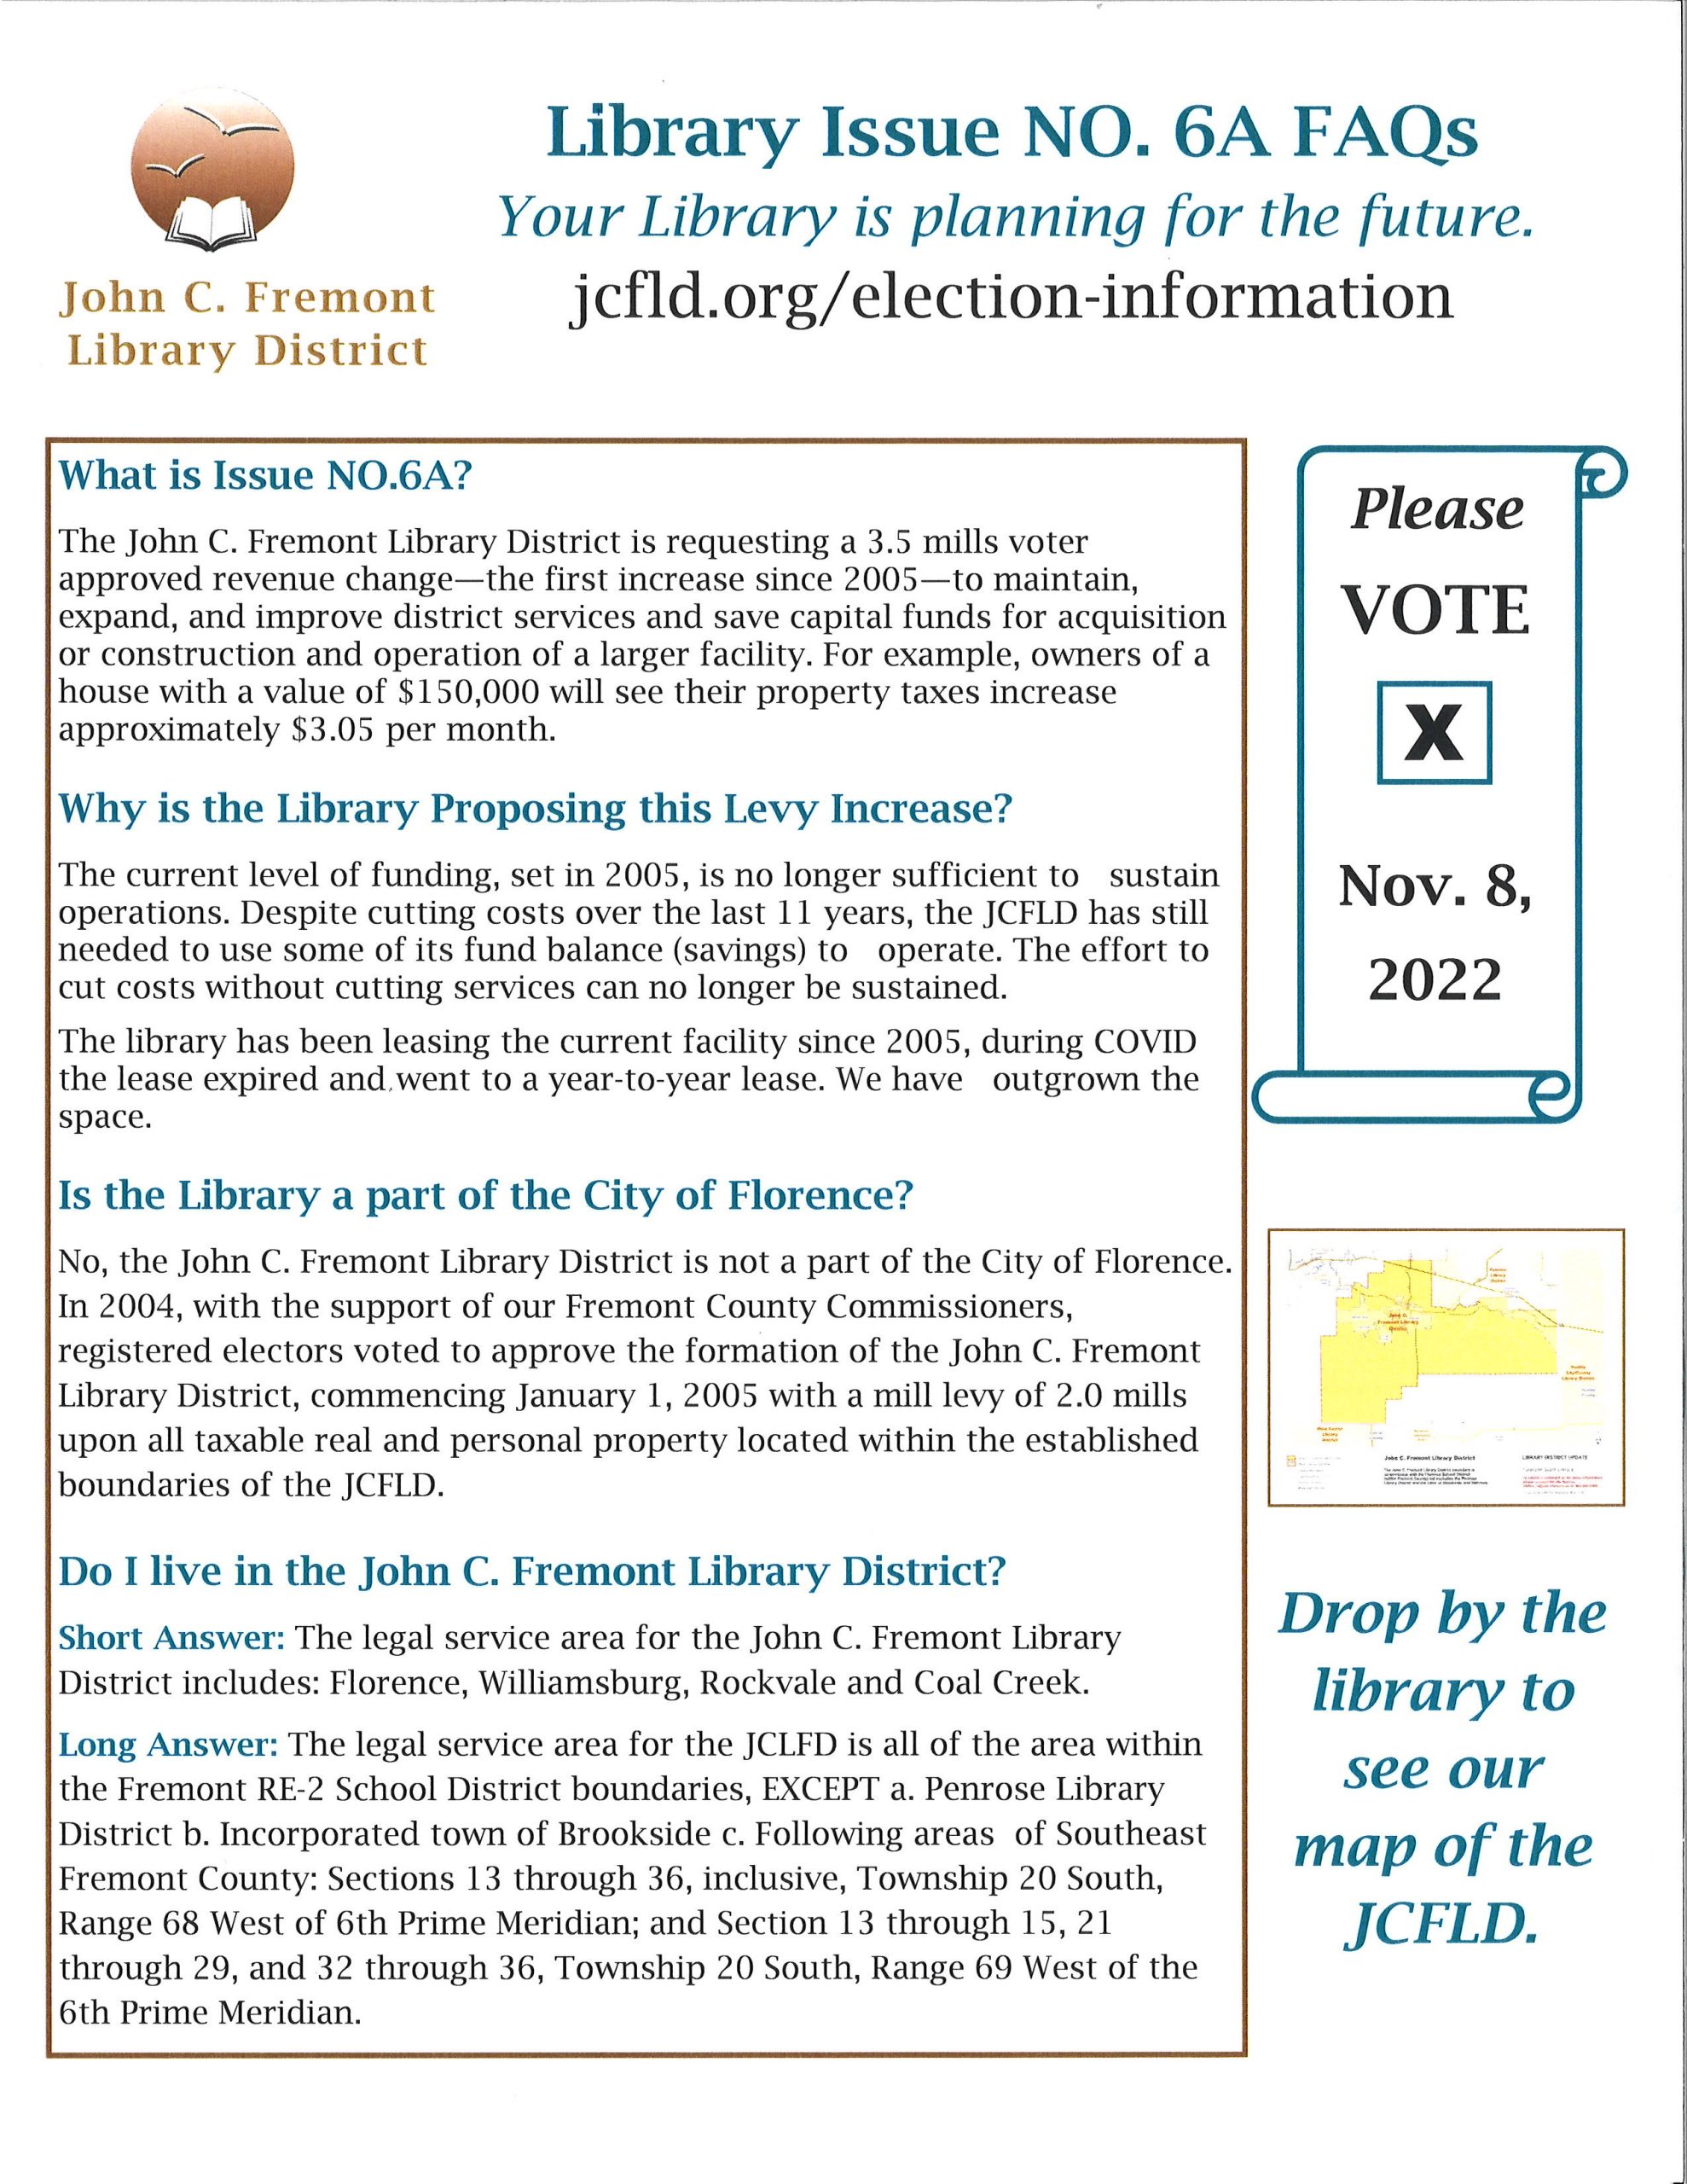 Information on Library Issue NO. 6A. If you would like to know anything please call 719-784-4649 Ex. 4 or email Tabby Selakovich at tabby.selakovich@florencecolibrary.org 